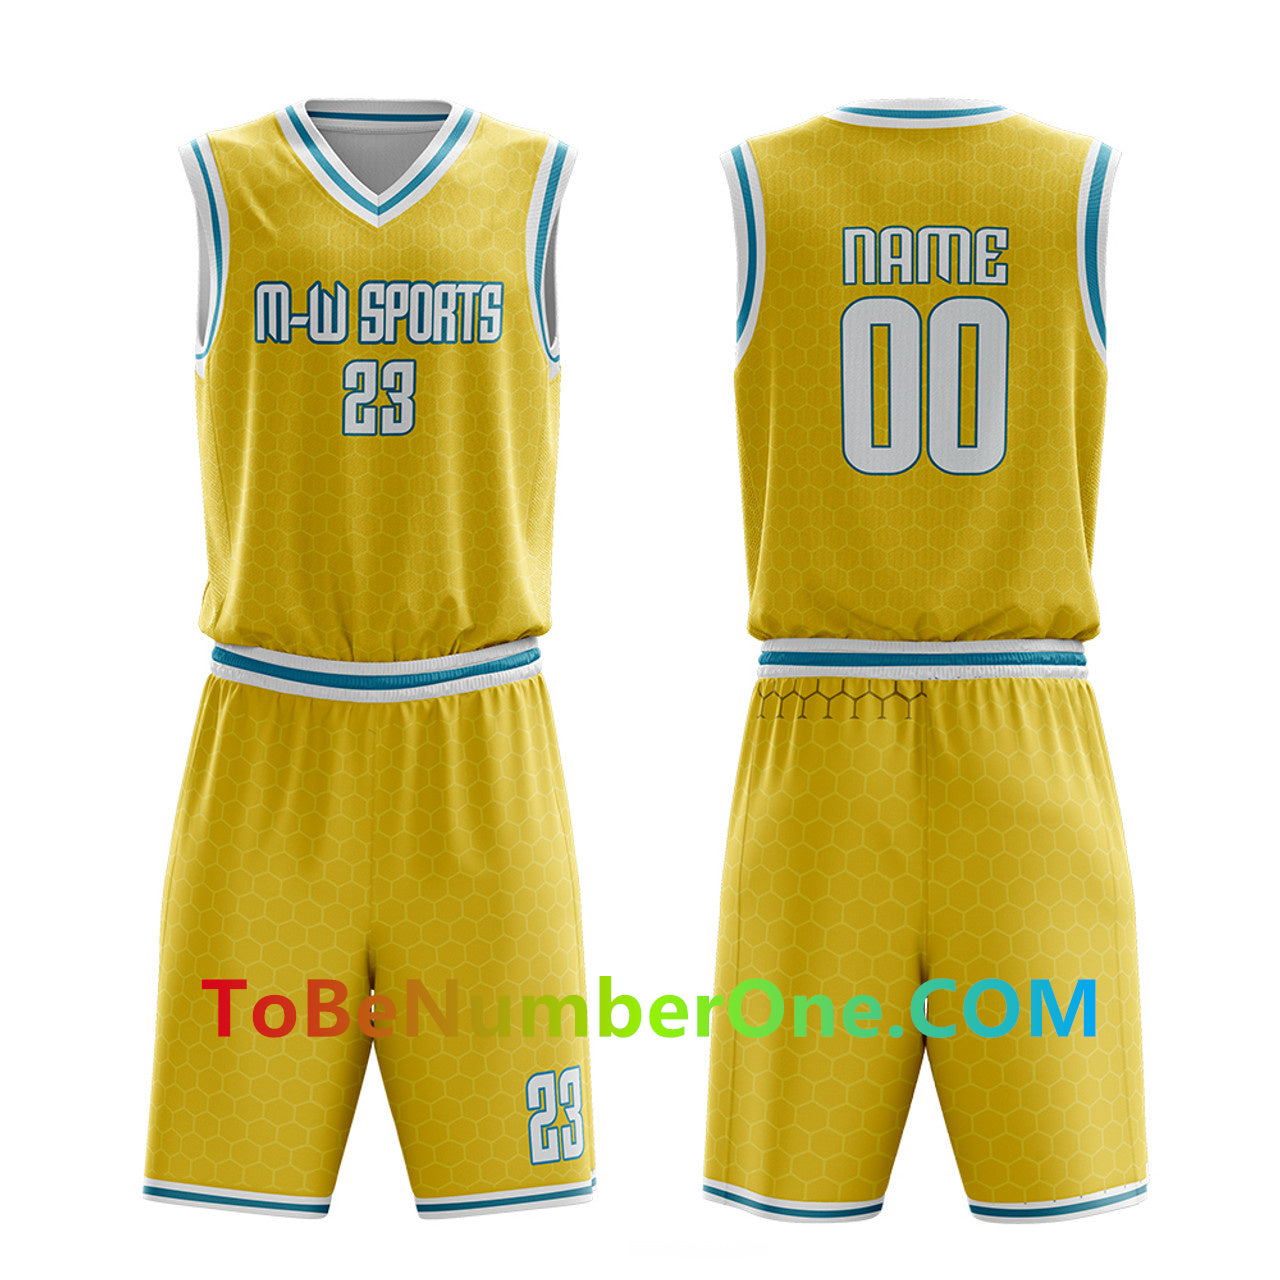 Custom Full Sublimated Basketball Set Tops and shorts - Make Your OWN Jersey - Personalized Team Uniforms B030